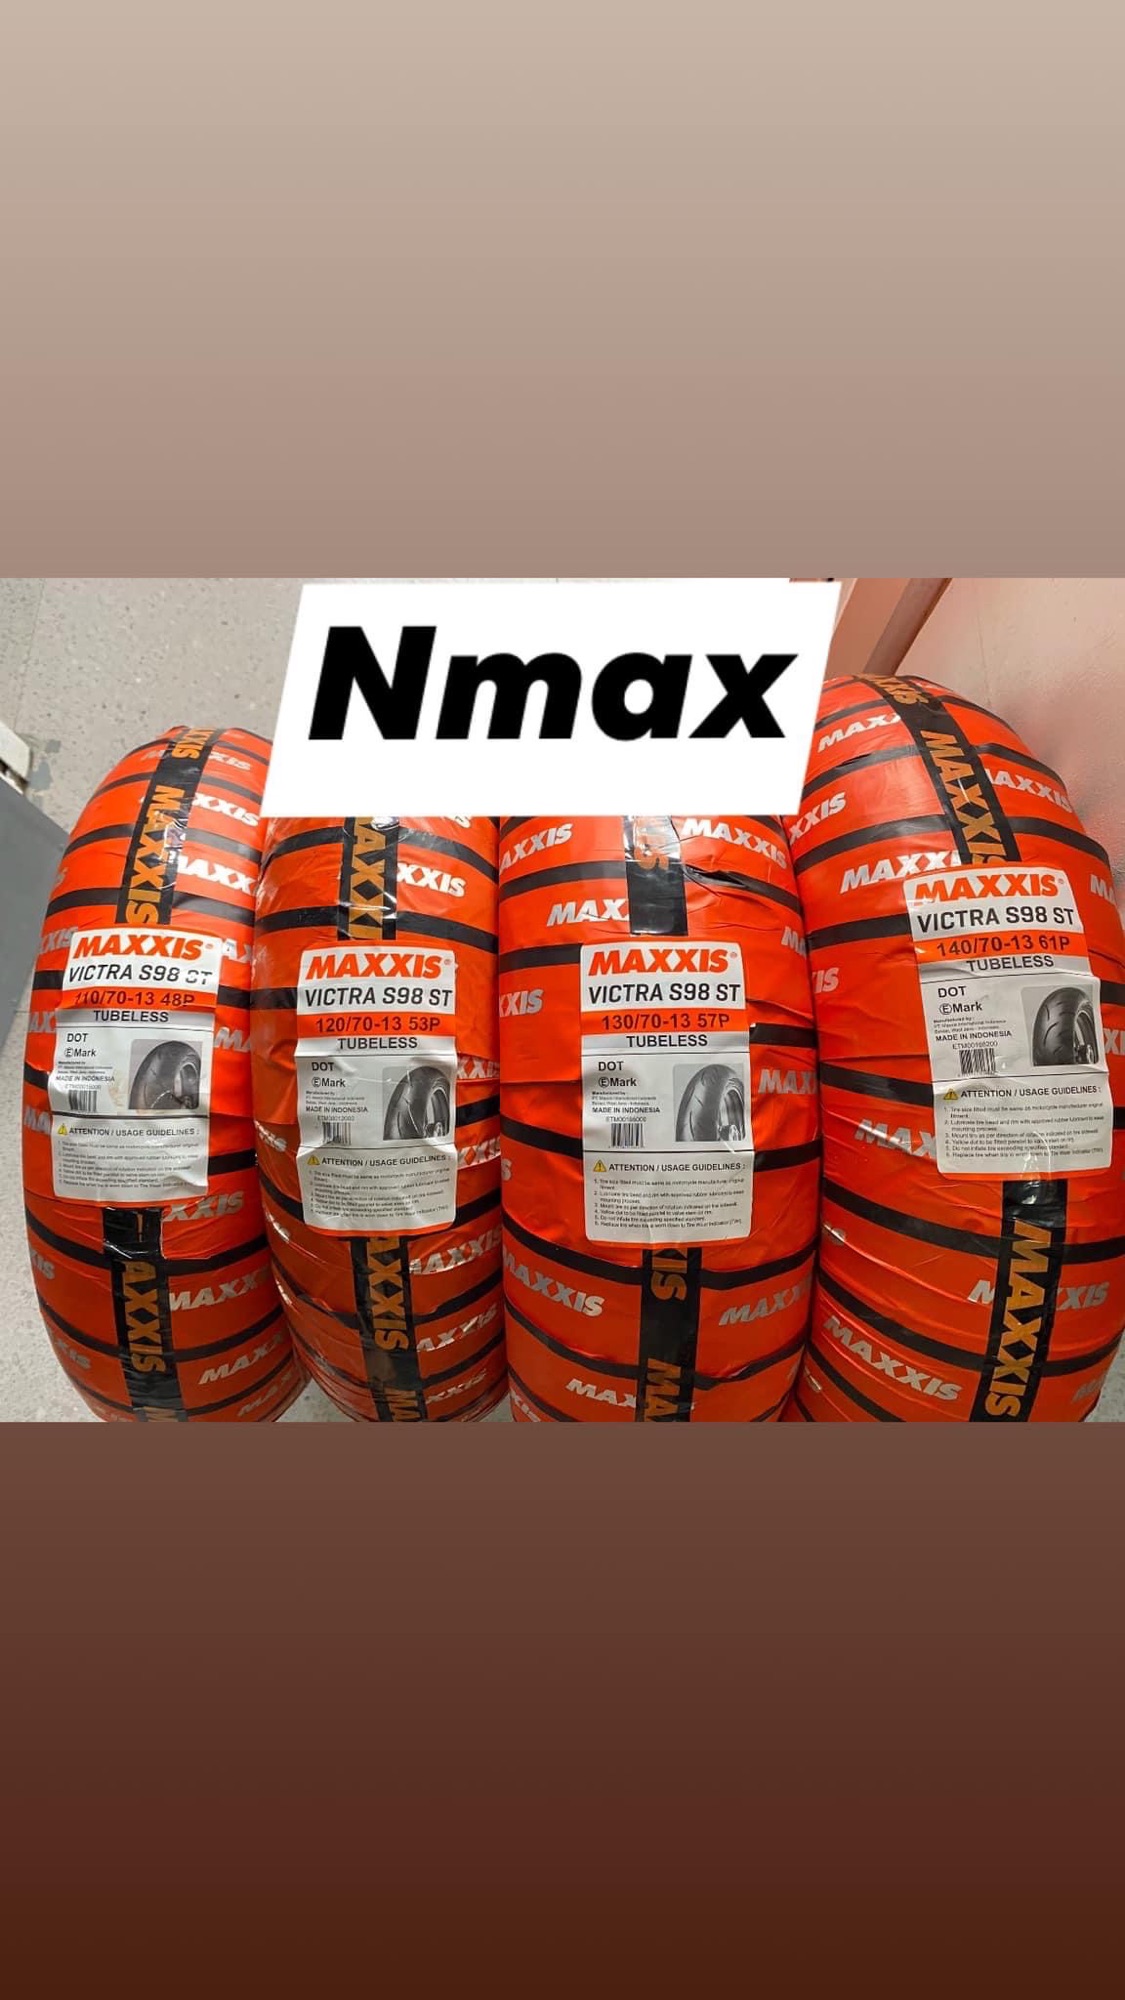 Maxxis Tire for Nmax 110/120/130/140 by 13 Tubeless